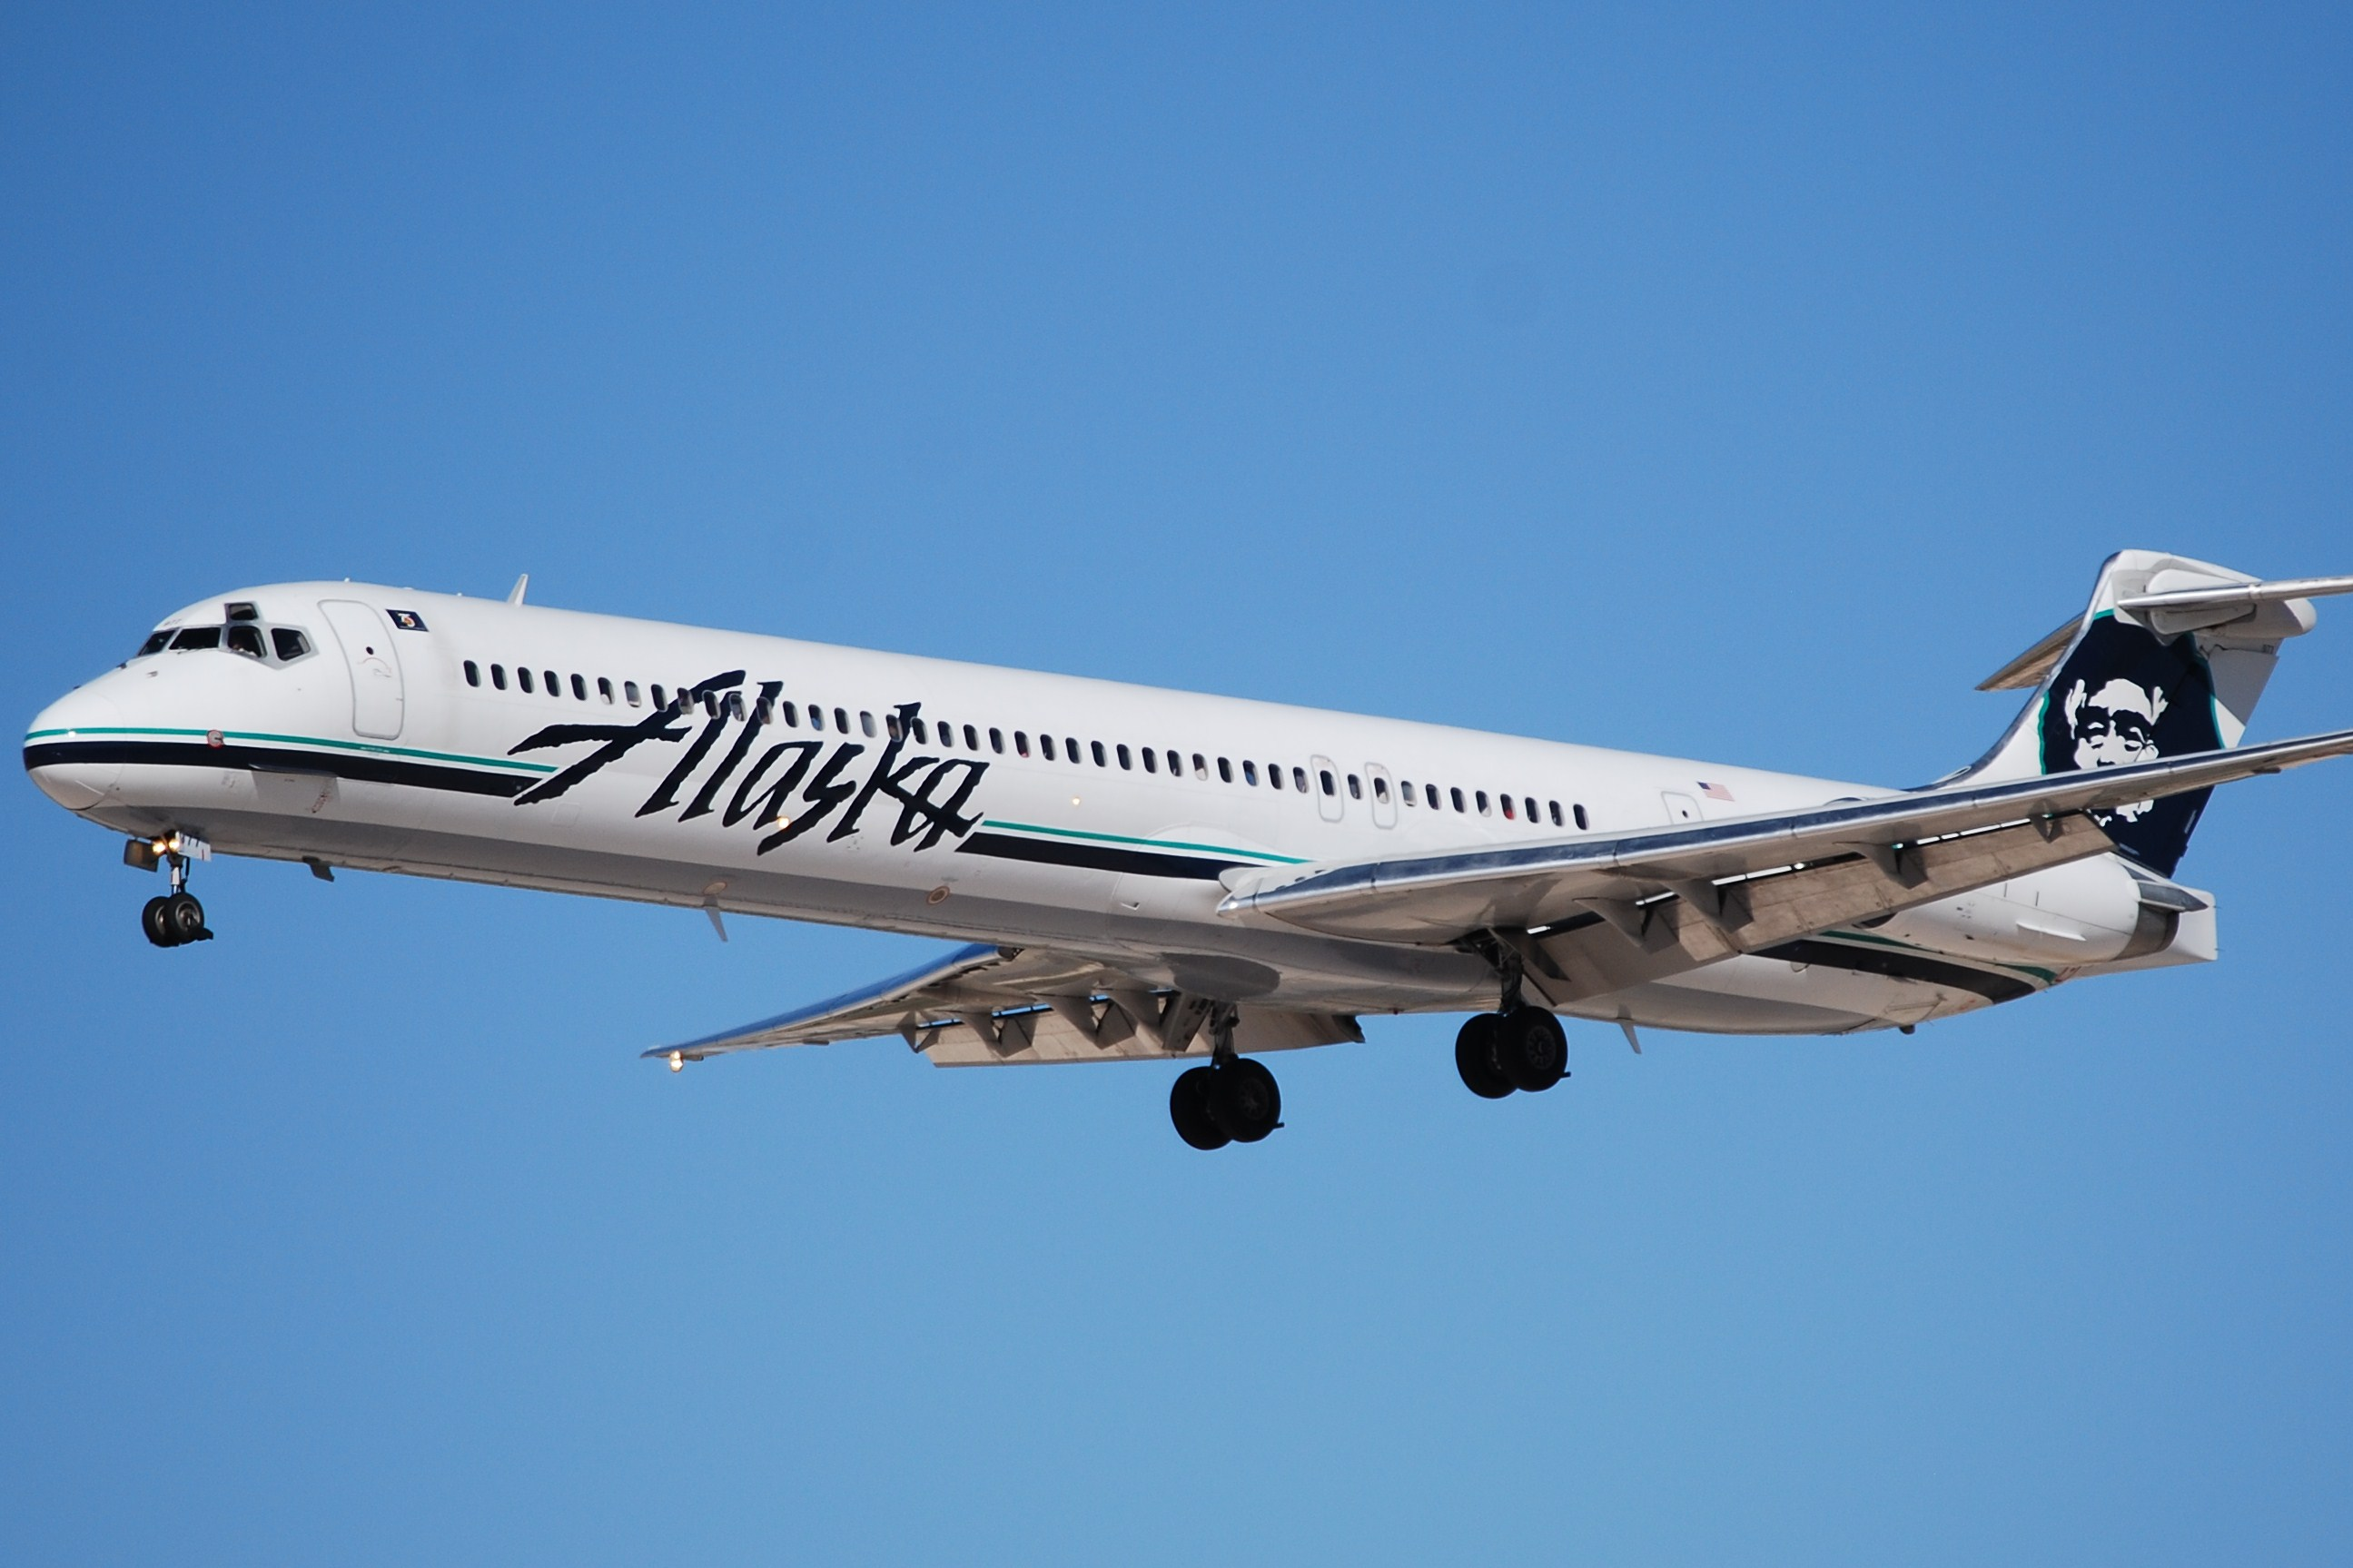 An Alaska Airlines MD-83 flying in the sky.